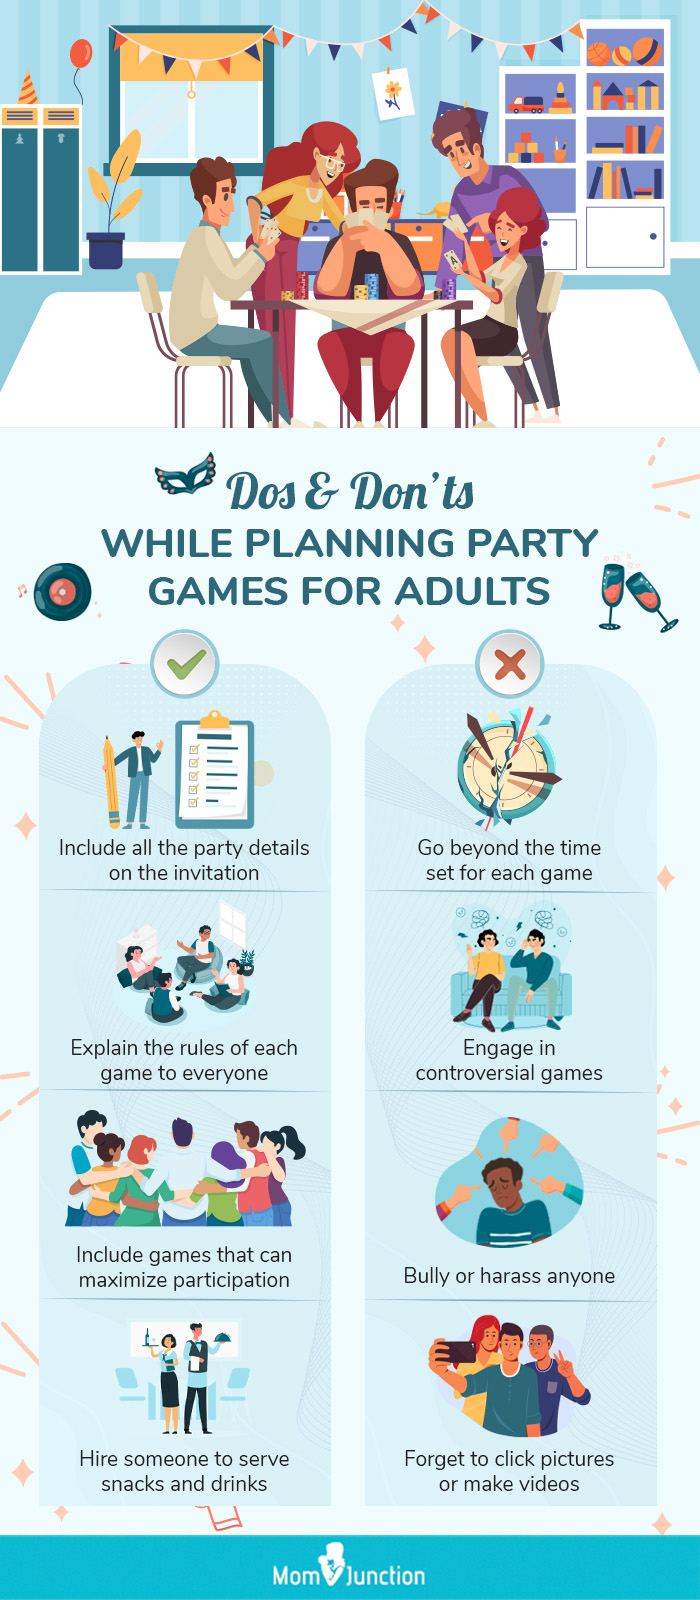 20 Simple And Amusing Party Games For Adults To Have